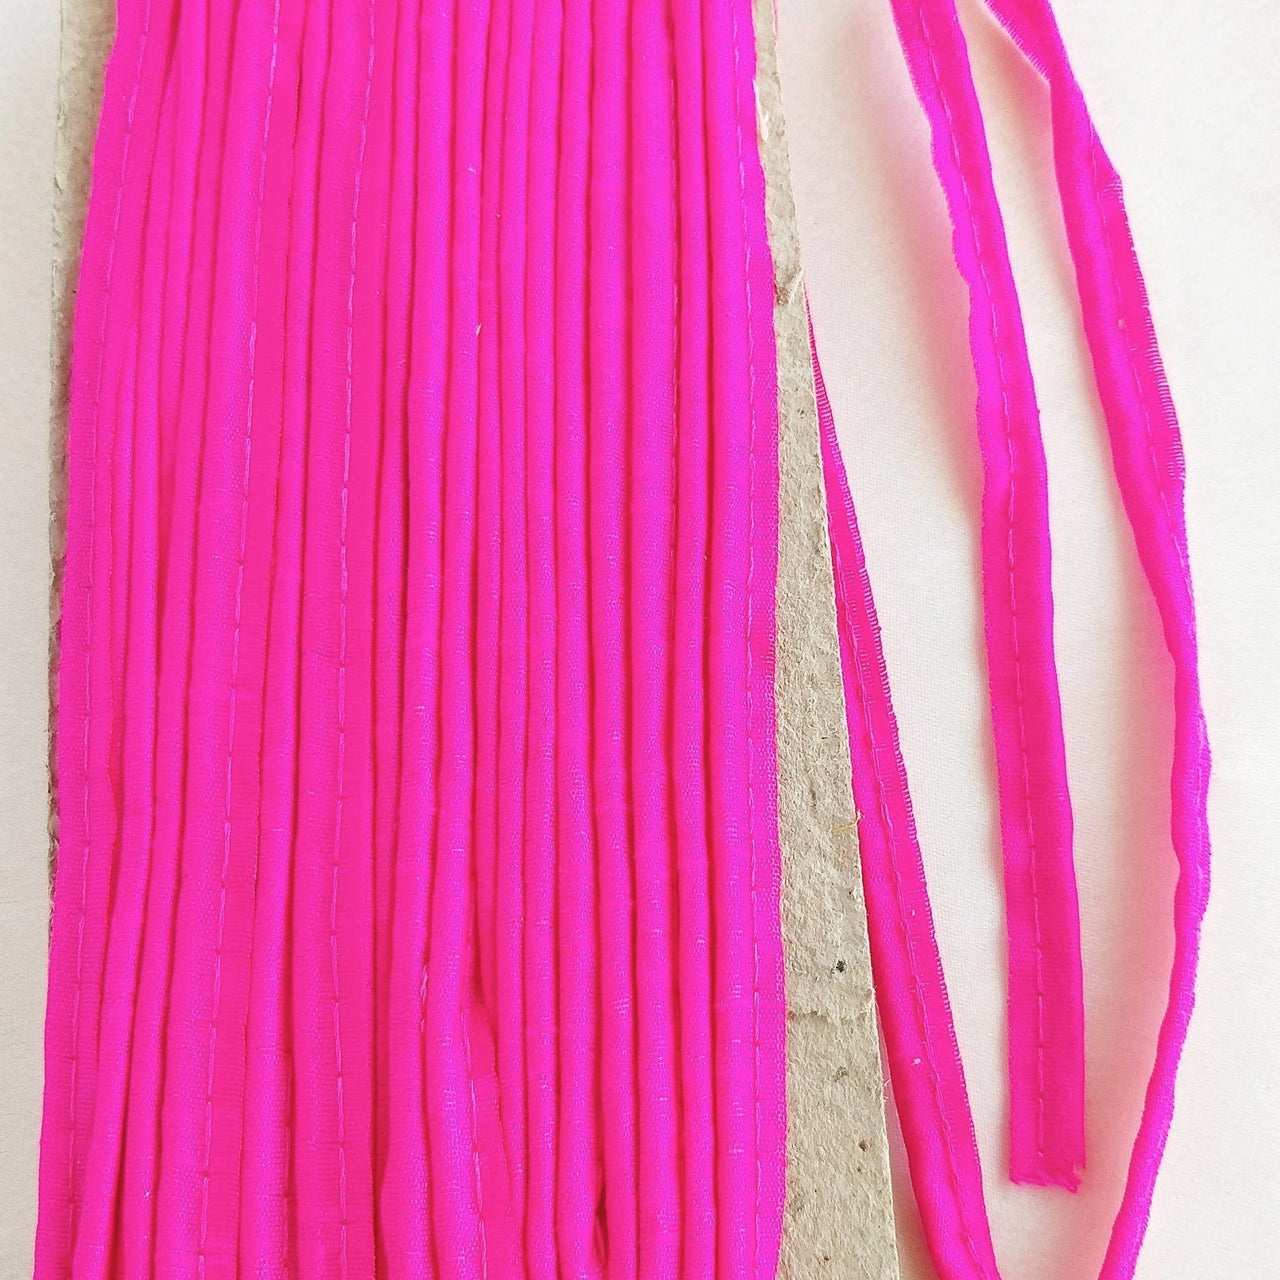 2mm Flanged Insertion Piping on 9mm Band, Fuchsia Pink Art Silk Fabric Trim, Cord piping Trim